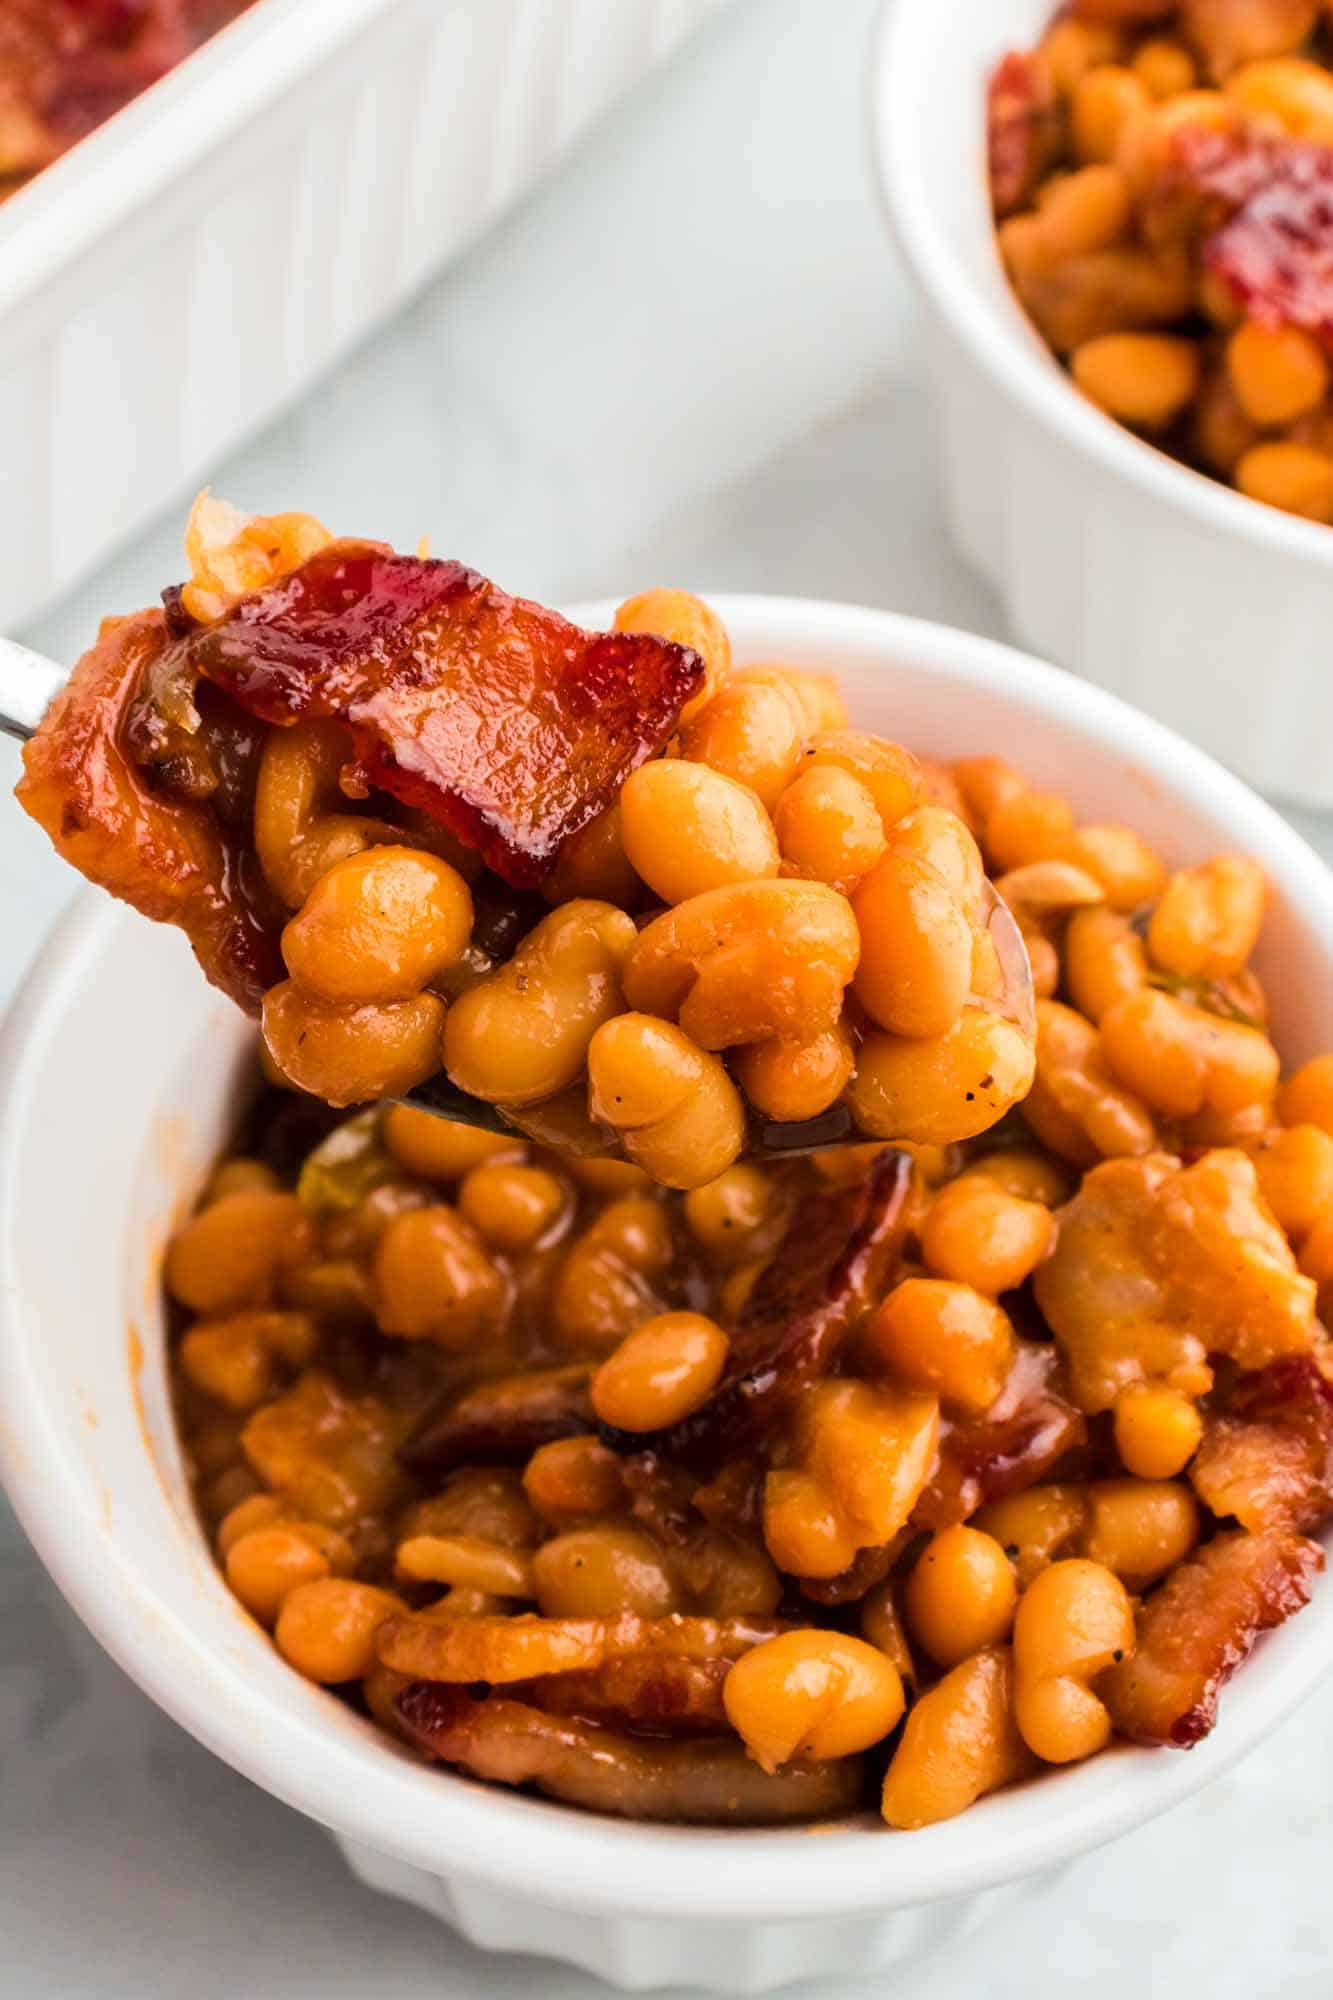 Baked beans with bacon served in a bowl